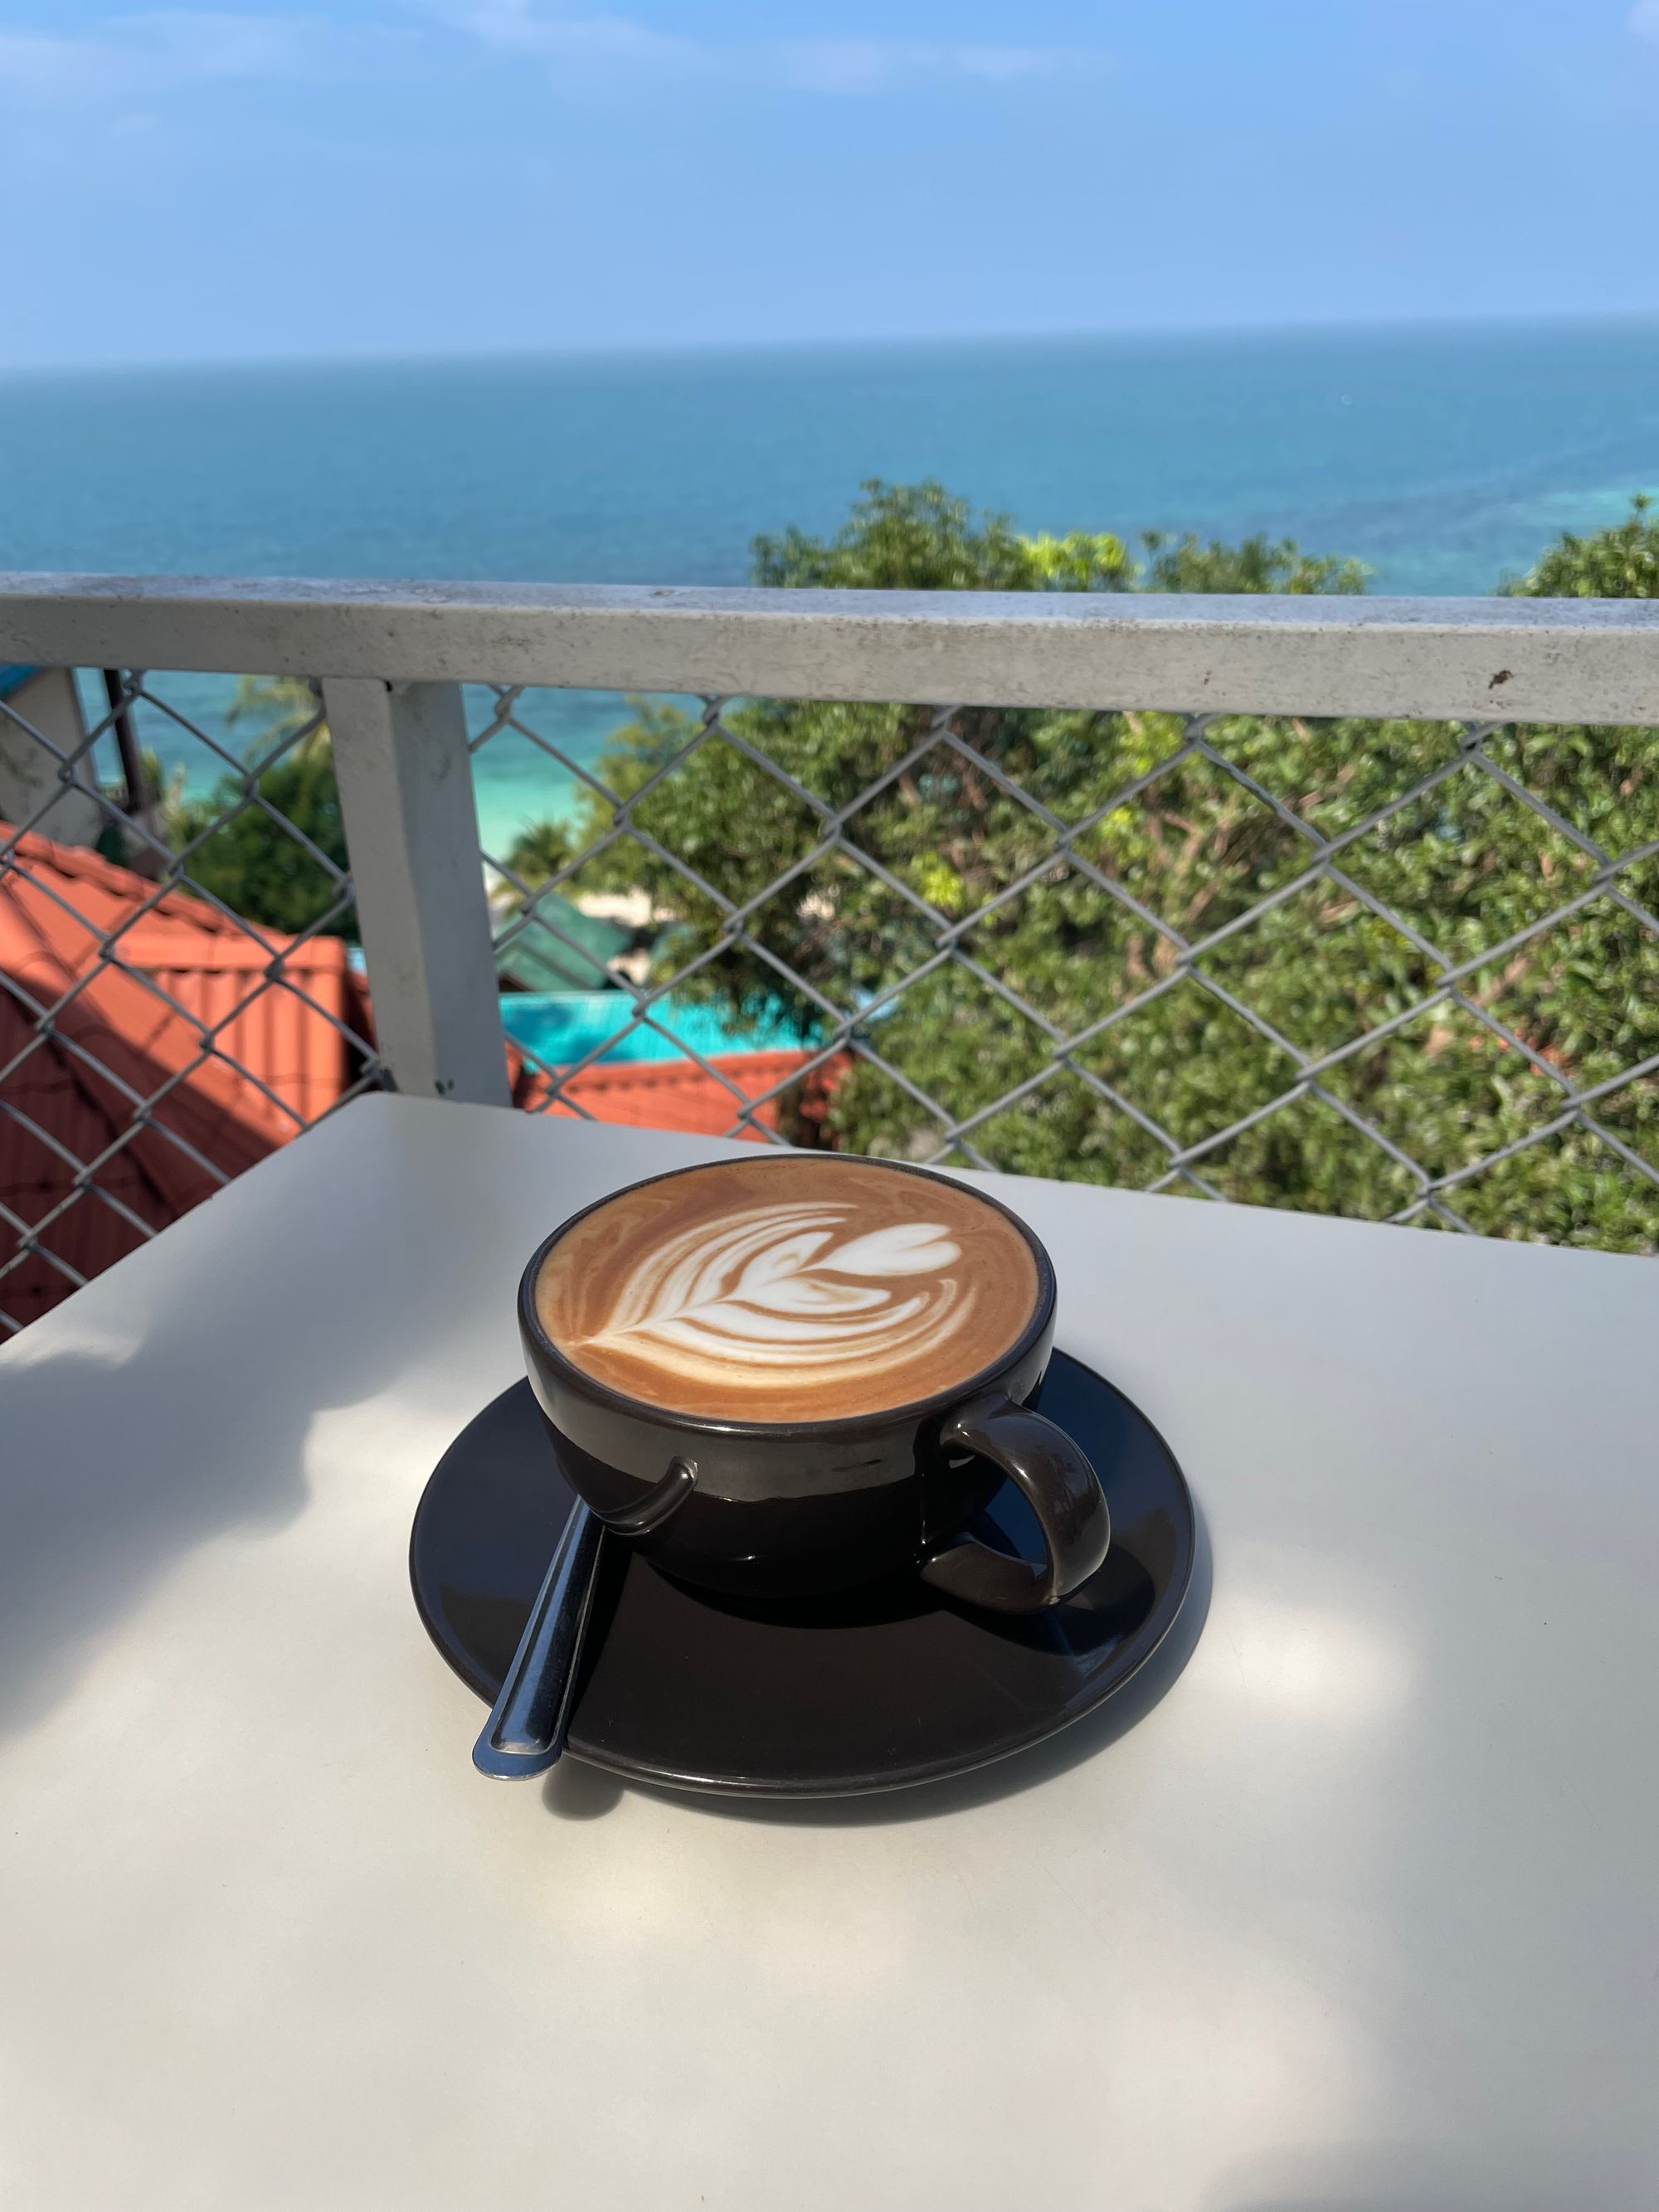 A popular cafe in Koh Phangan with a view of the sea